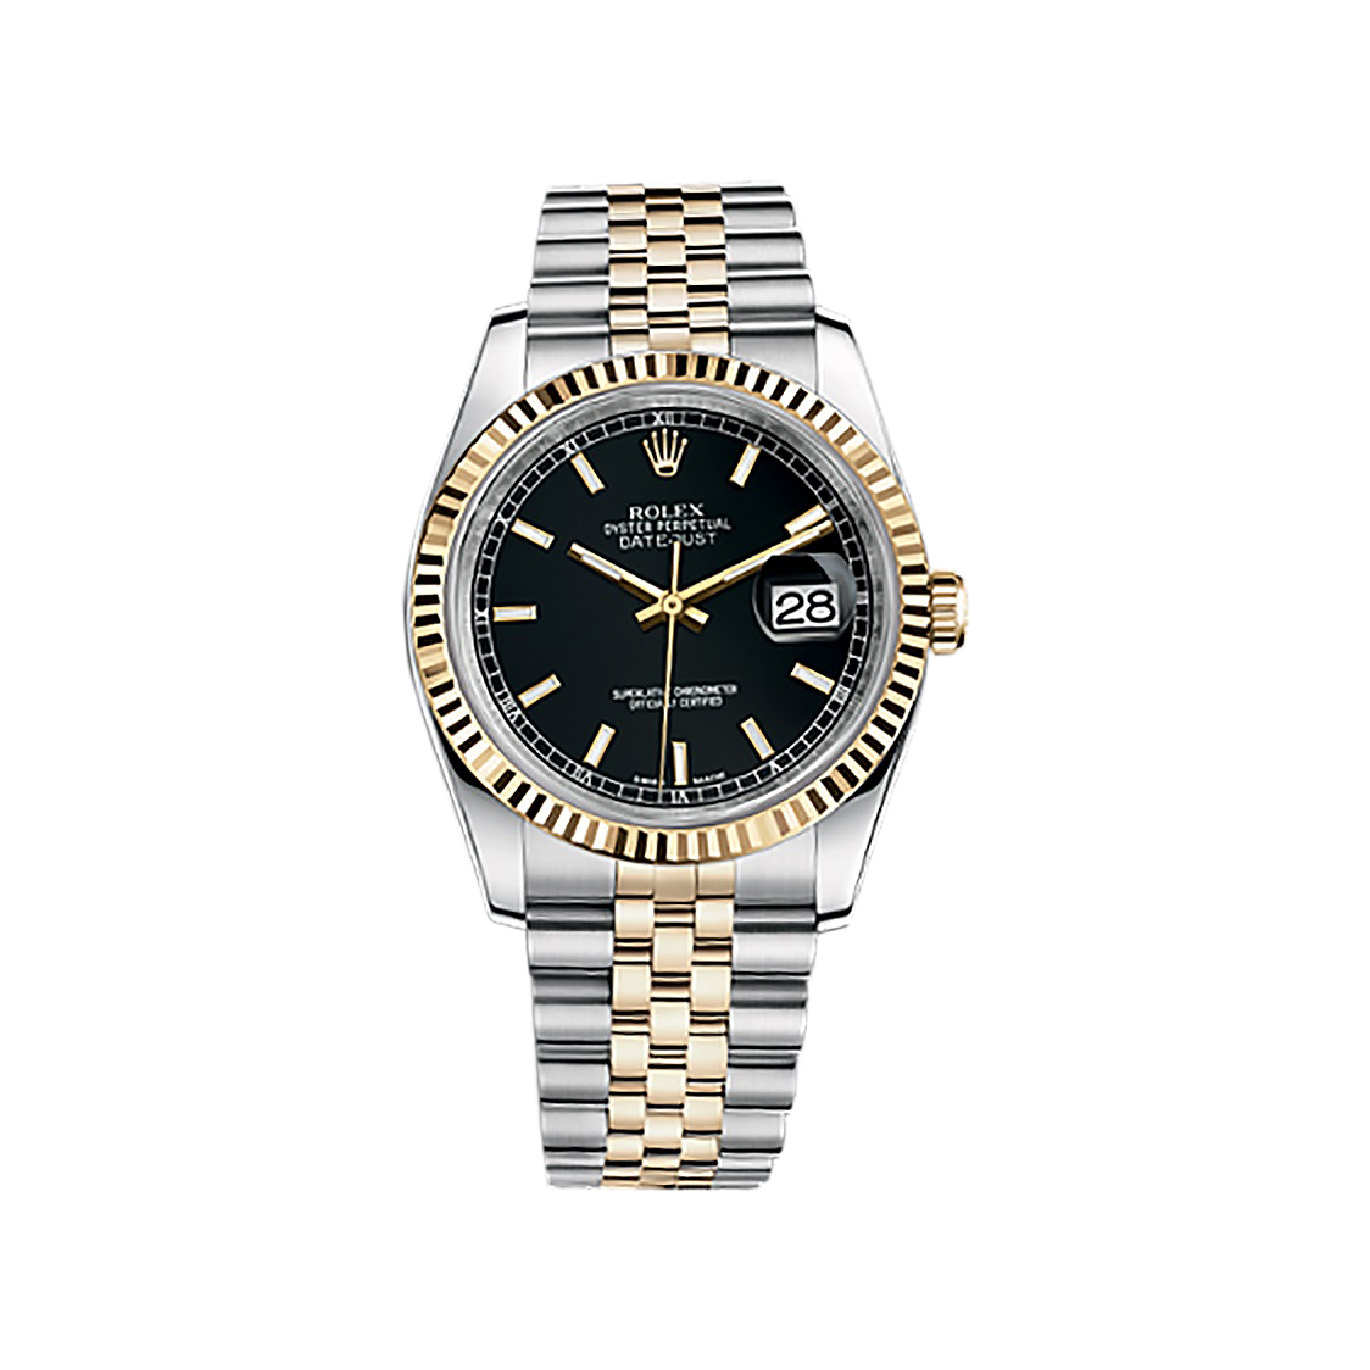 Datejust 36 116233 Gold & Stainless Steel Watch (Black) - Click Image to Close